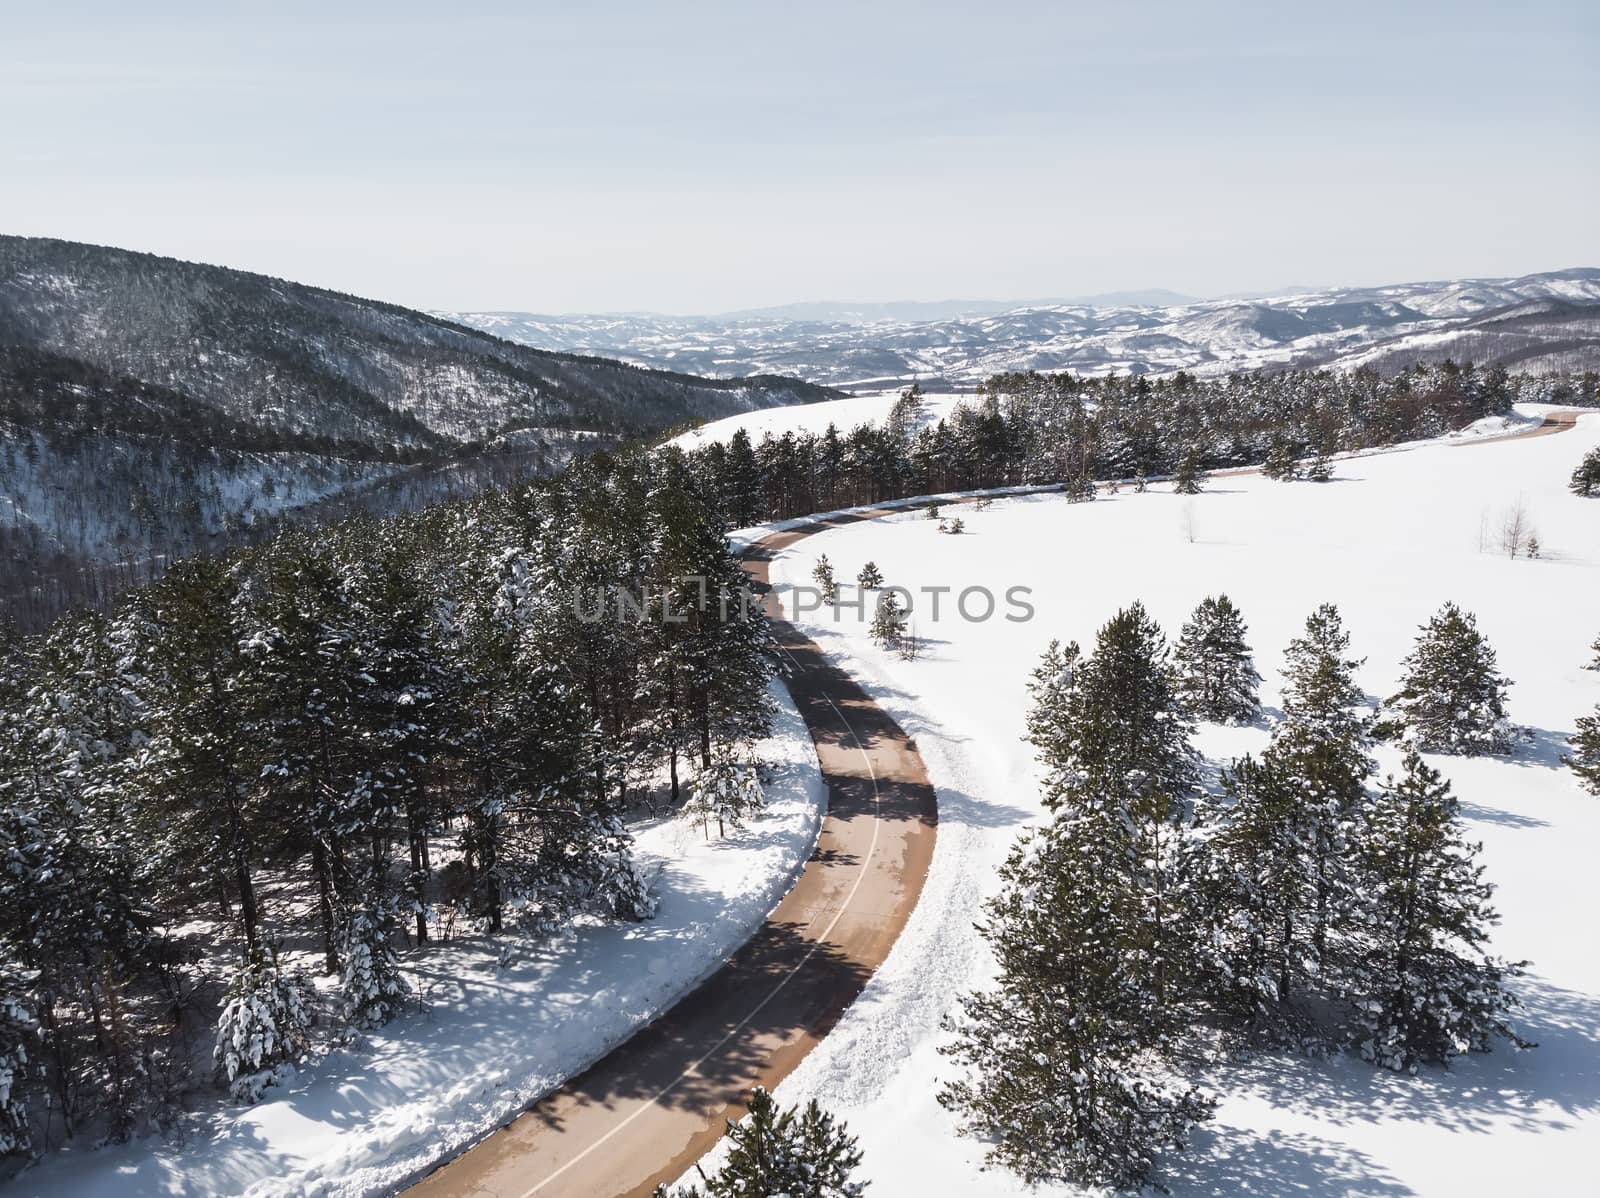 Winter landscape in sunlight. View on the mountain road surrounded by evergreen trees in winter, drone shot by Slast20